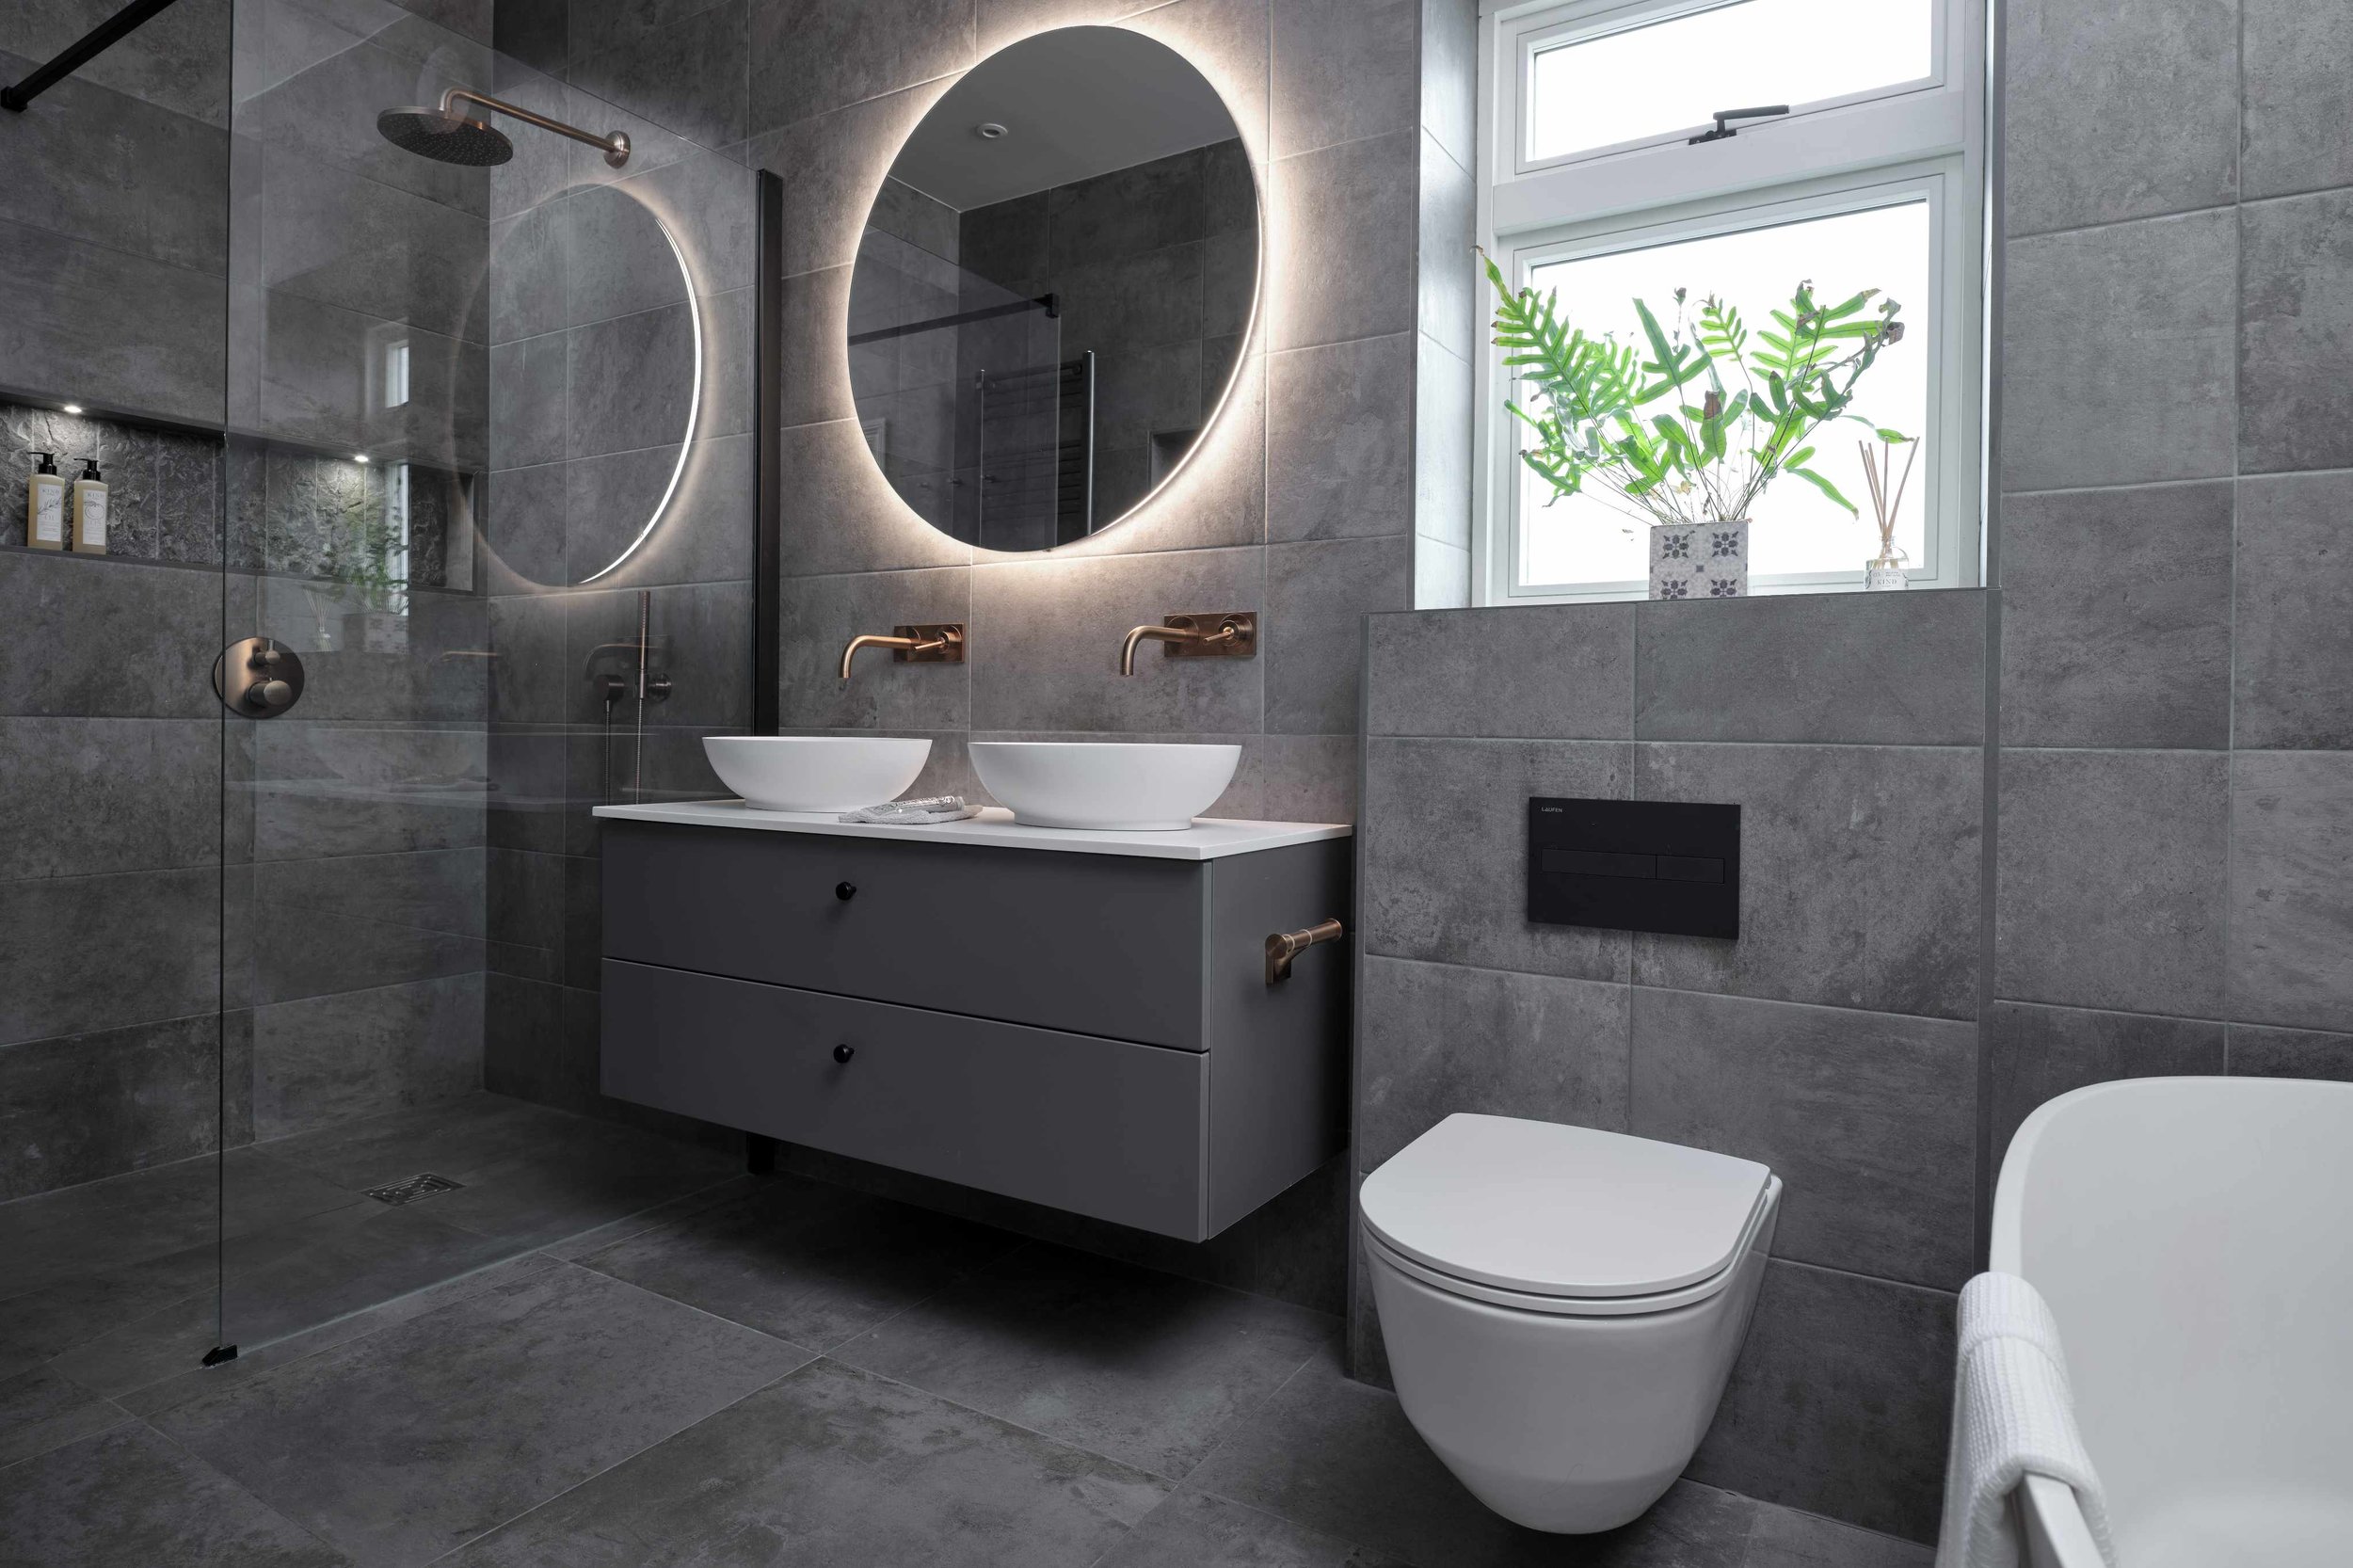 What to Look for When Choosing Bathroom Suites